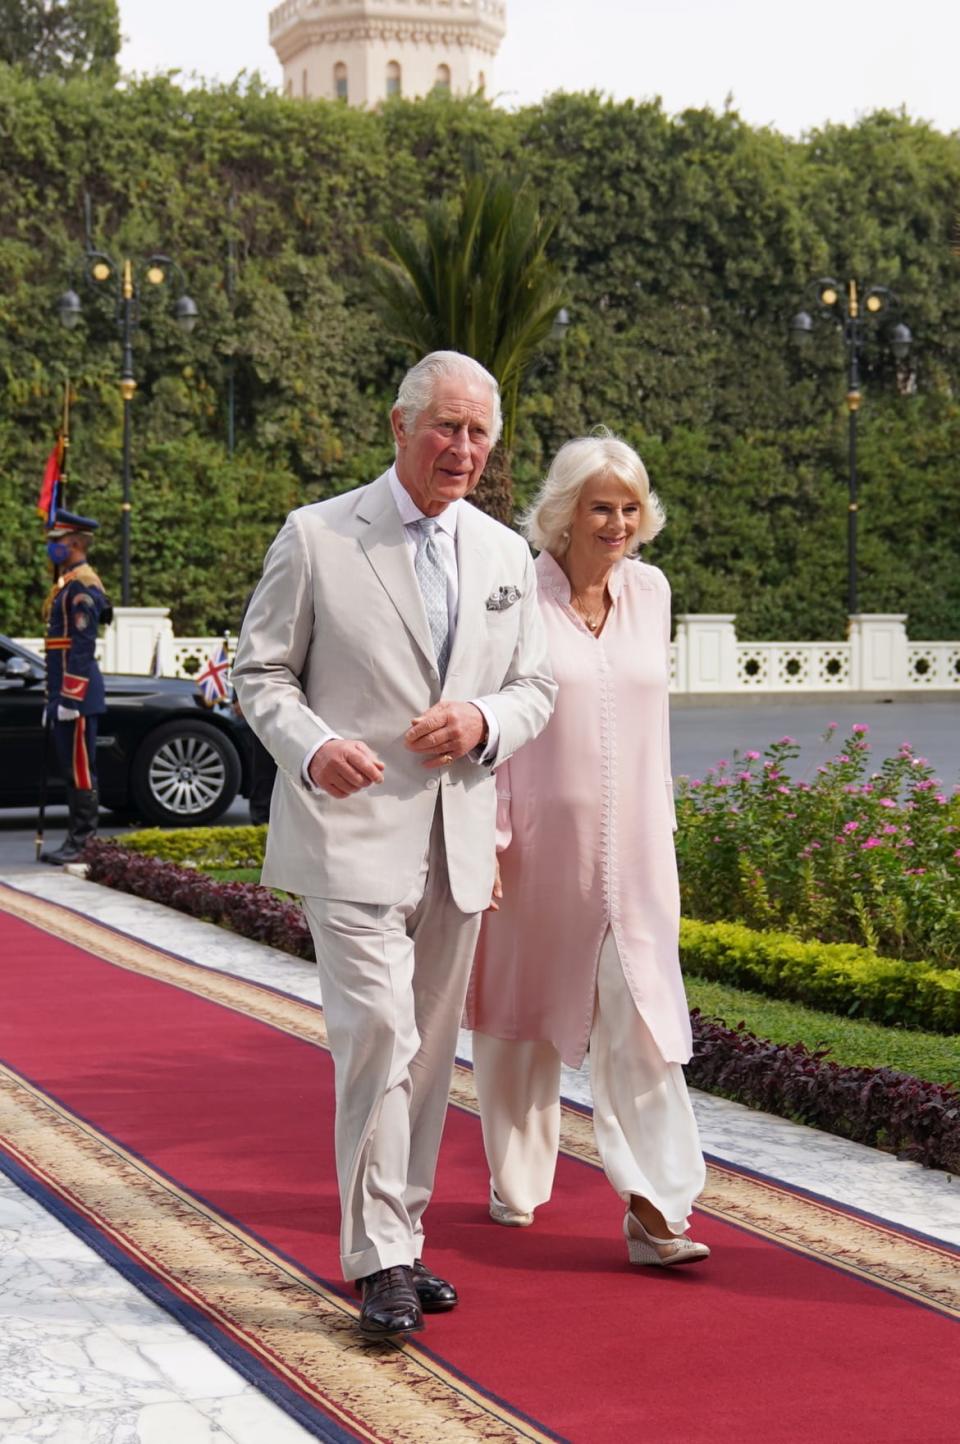 <div class="inline-image__caption"><p>Britain's Charles, Prince of Wales, and Camilla, Duchess of Cornwall, arrive to meet Egypt's President Abdel Fattah el-Sisi and First Lady Entissar Amer at Al-Ittihadiya Palace, on the third day of their tour of the Middle East, in Cairo, Egypt November 18, 2021.</p></div> <div class="inline-image__credit">Joe Giddens/Pool via REUTERS</div>